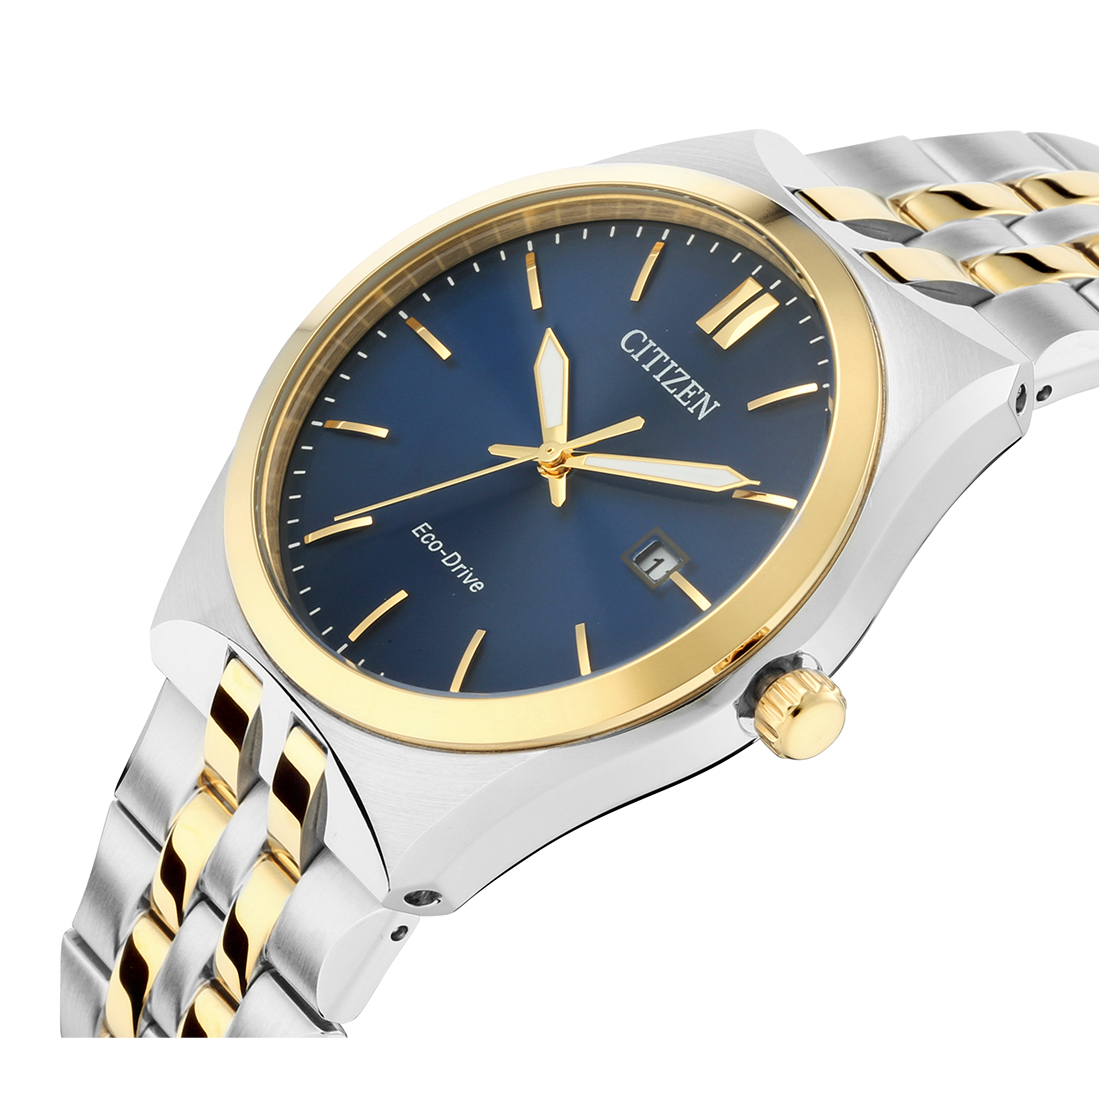 Citizen watches redefines class and comfort.Get your watches